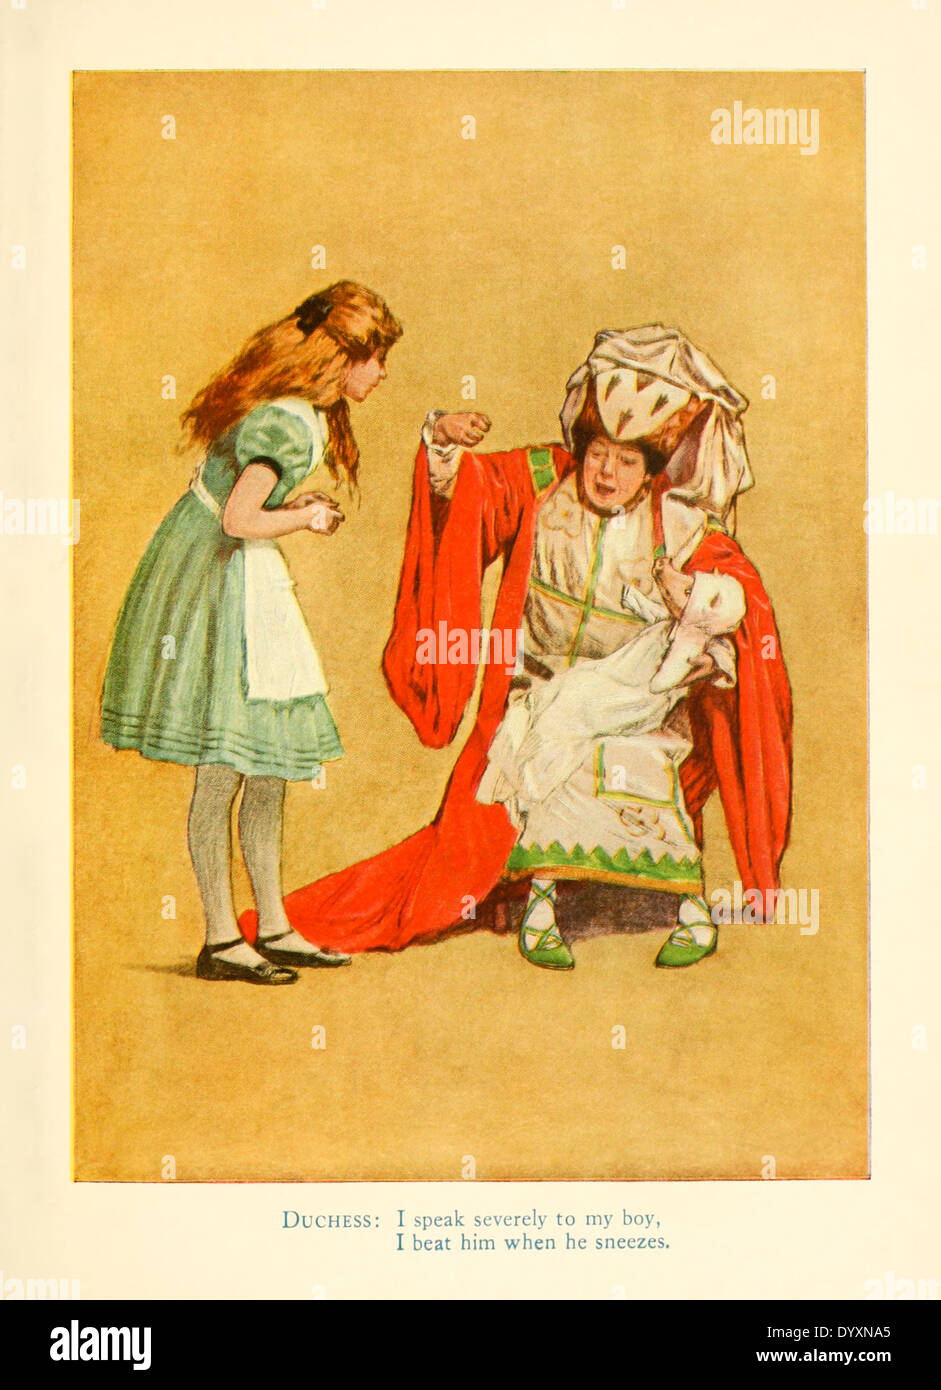 The Duchess and the Pig Baby, from for the 1915 stage adaptation of 'Alice in Wonderland' by Lewis Carroll, illustration by James Allen St. John (1872-1957). See description for more information. Stock Photo